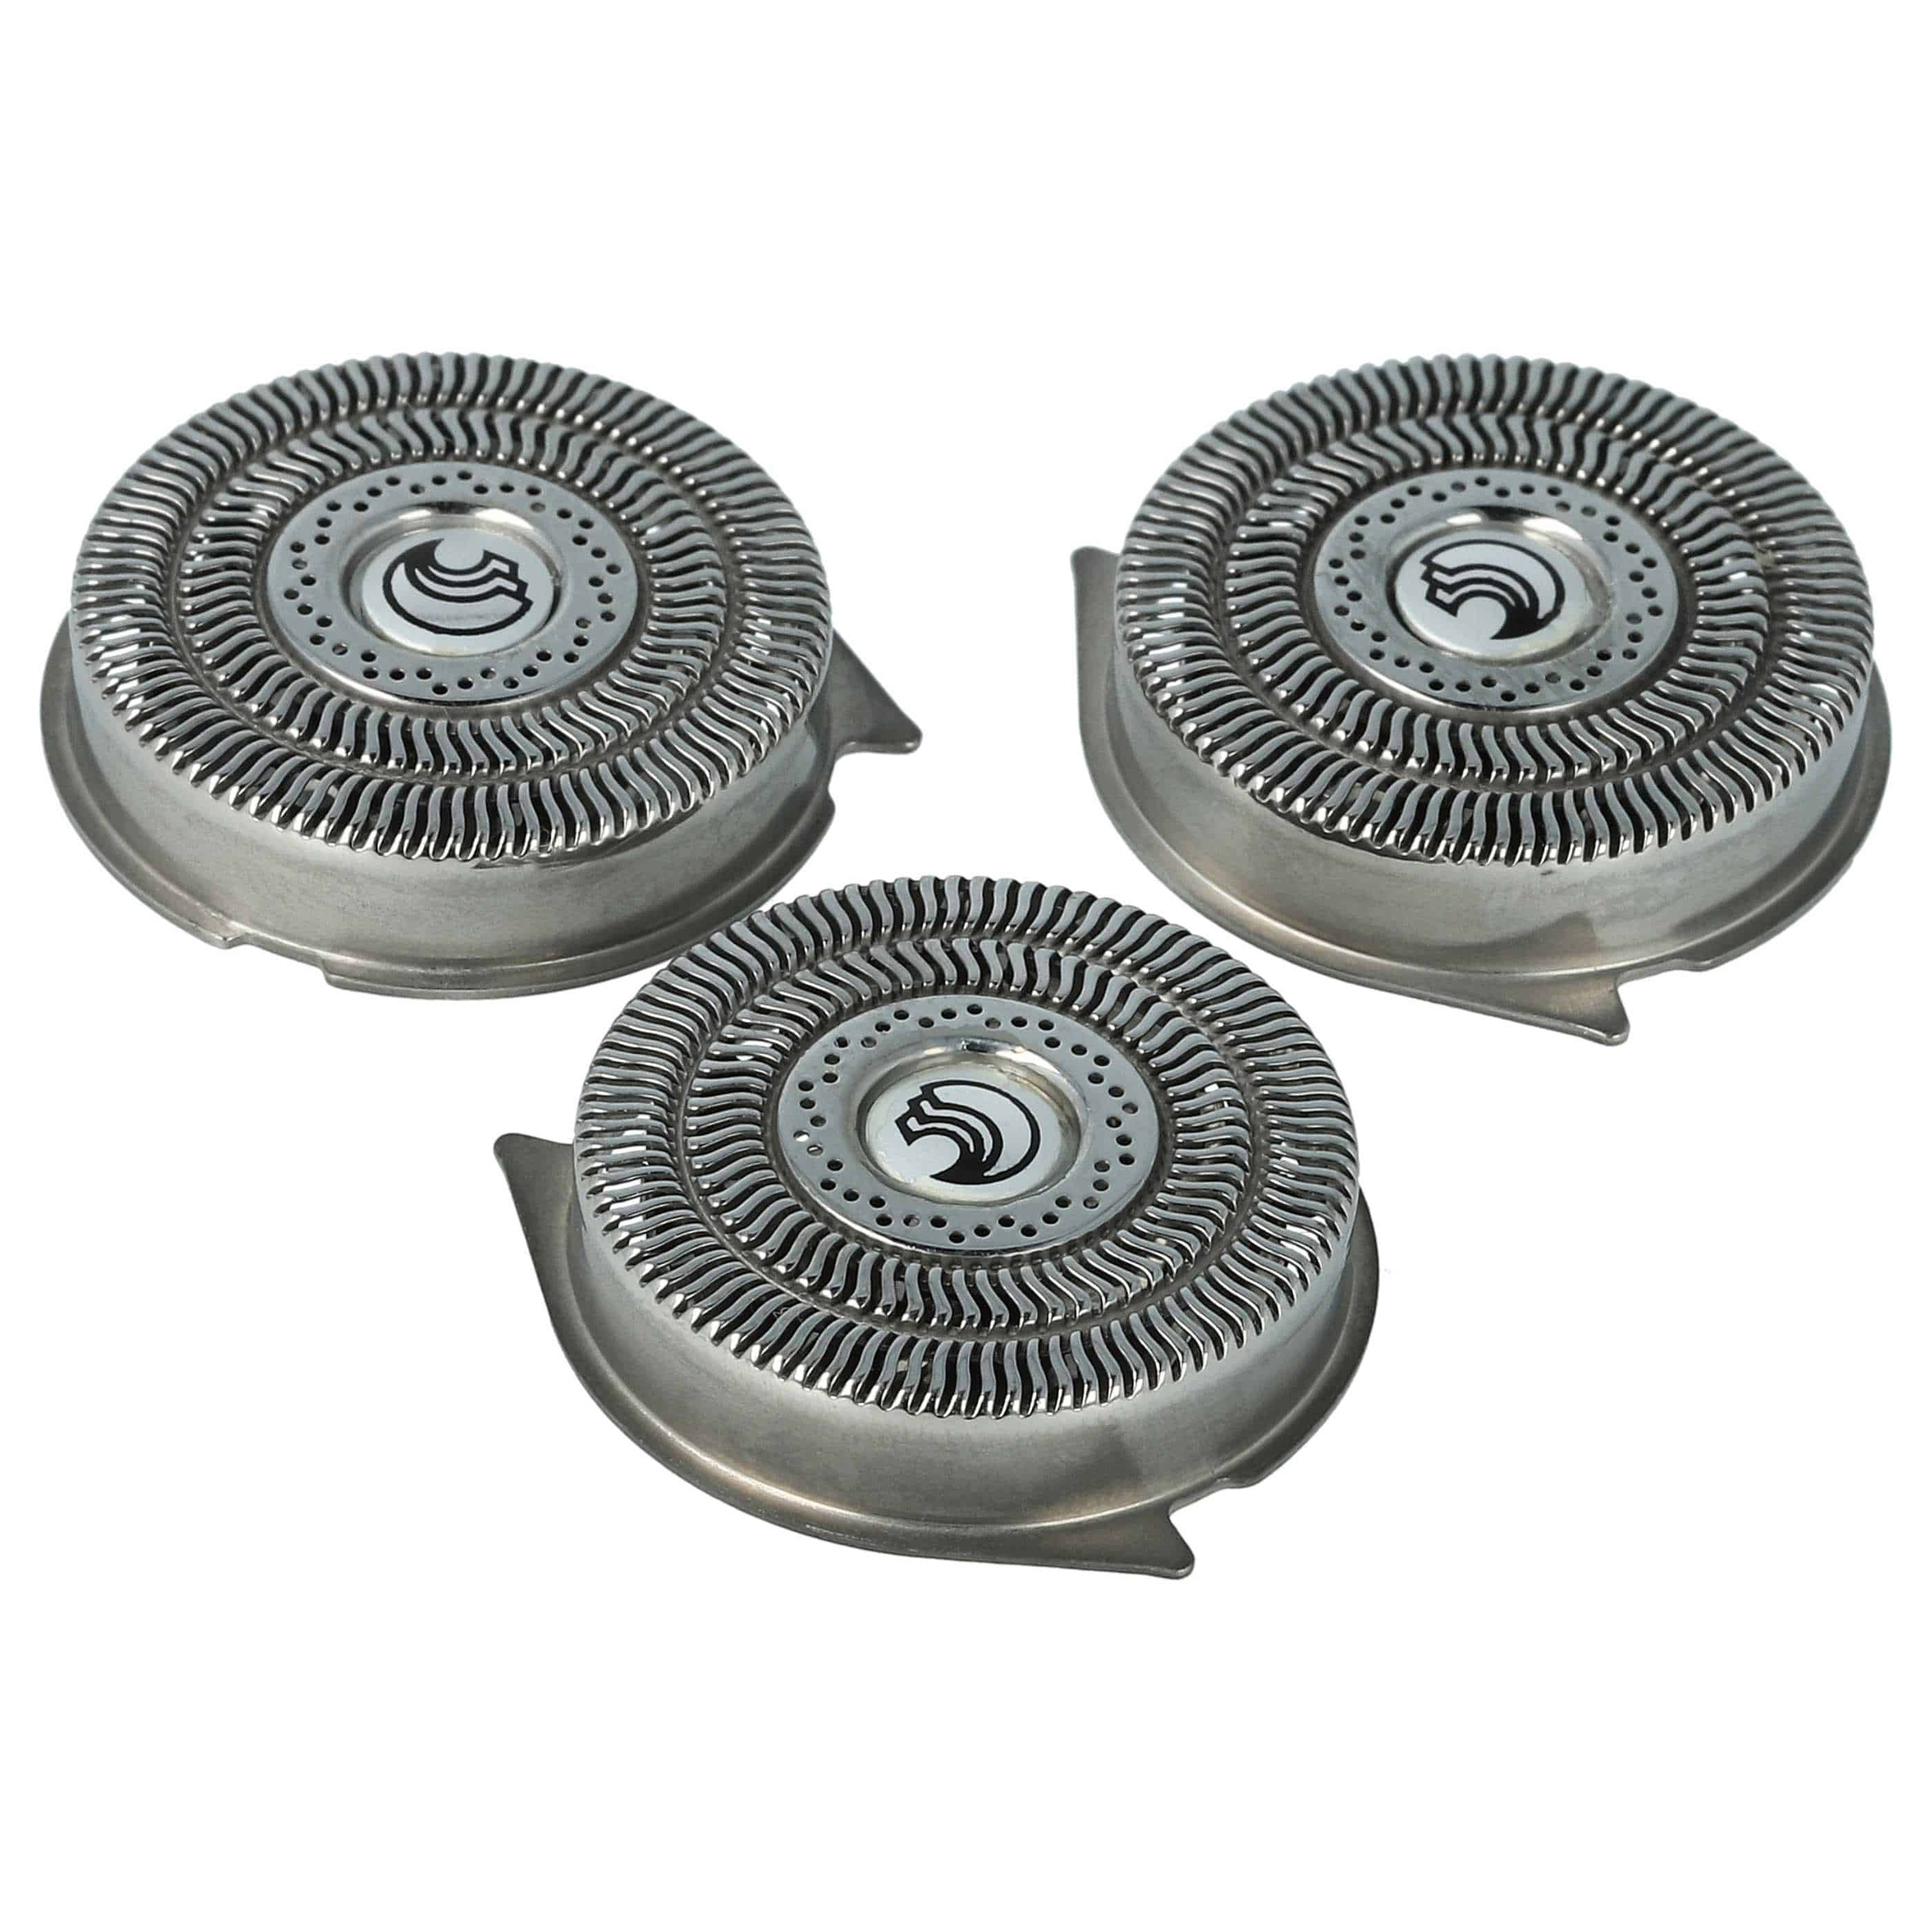 3x shaving head as Replacement for Philips HQ9 for Philips Shaver - Stainless Steel